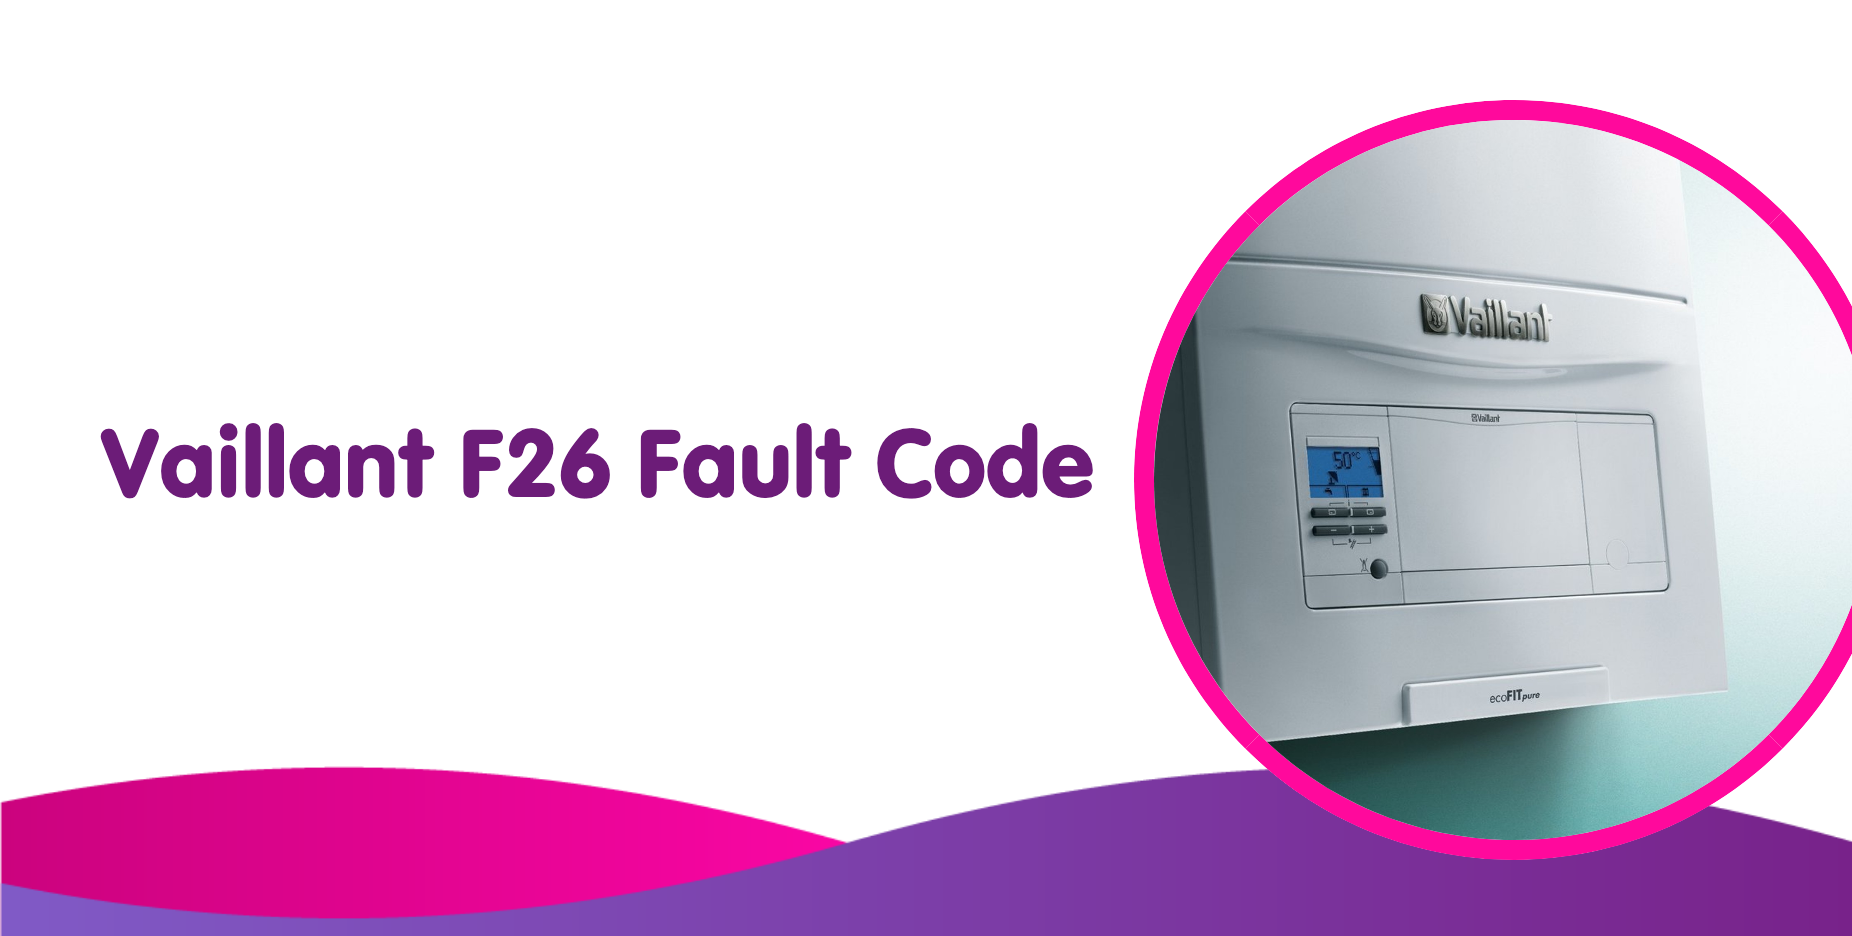 Vaillant F26 Fault Code  Meaning, Causes & How To Fix It